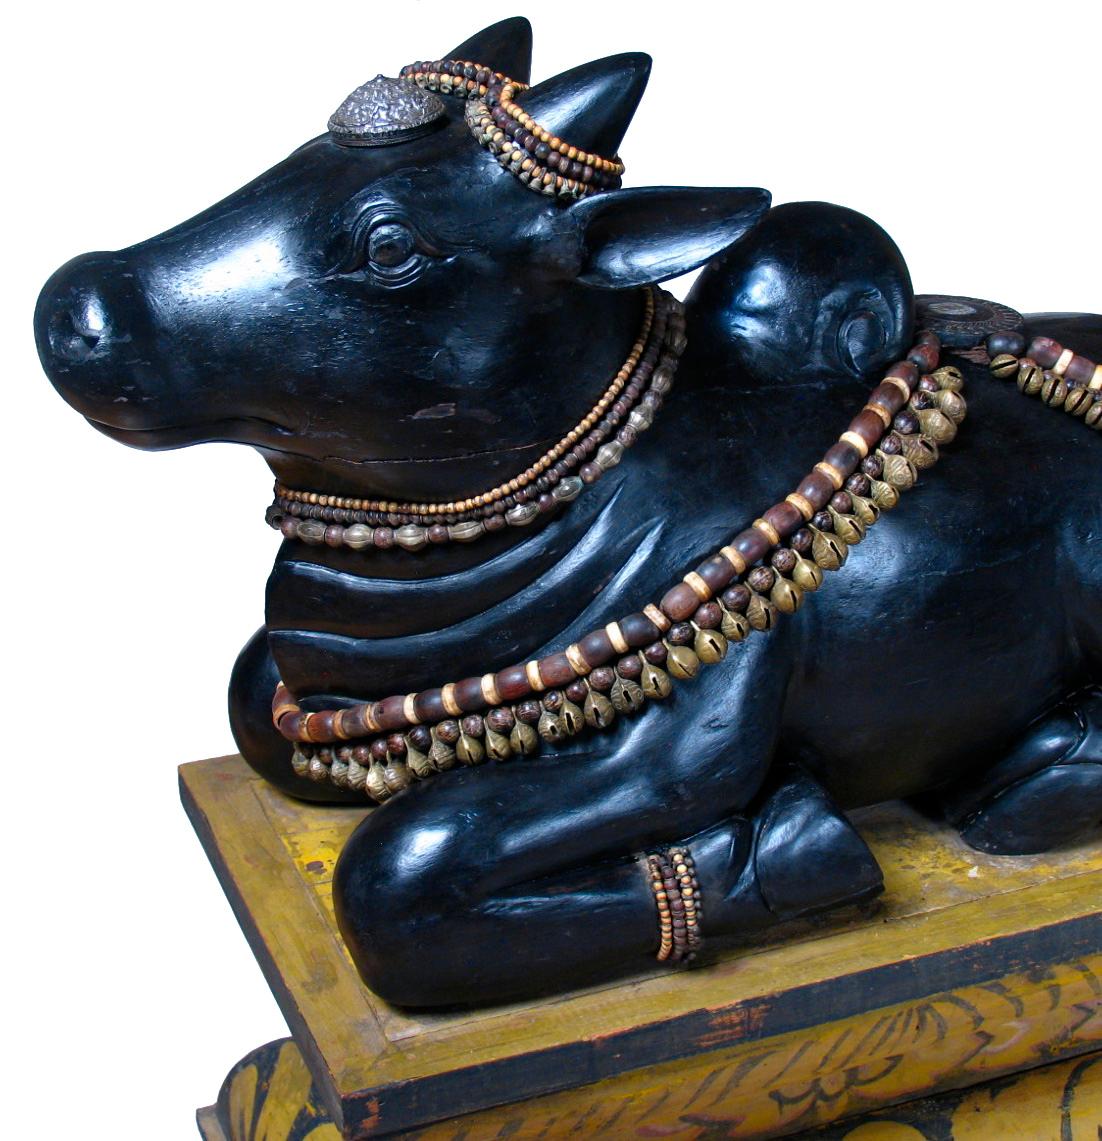 South Indian carved wood sculpture depicting the Hindu deity of Nandi, a recumbent black bull figure, known within the Hindu faith as the vehicle for Siva, often depicted in sculpture in a Hindu temple facing Lord Siva, often prayed to as a